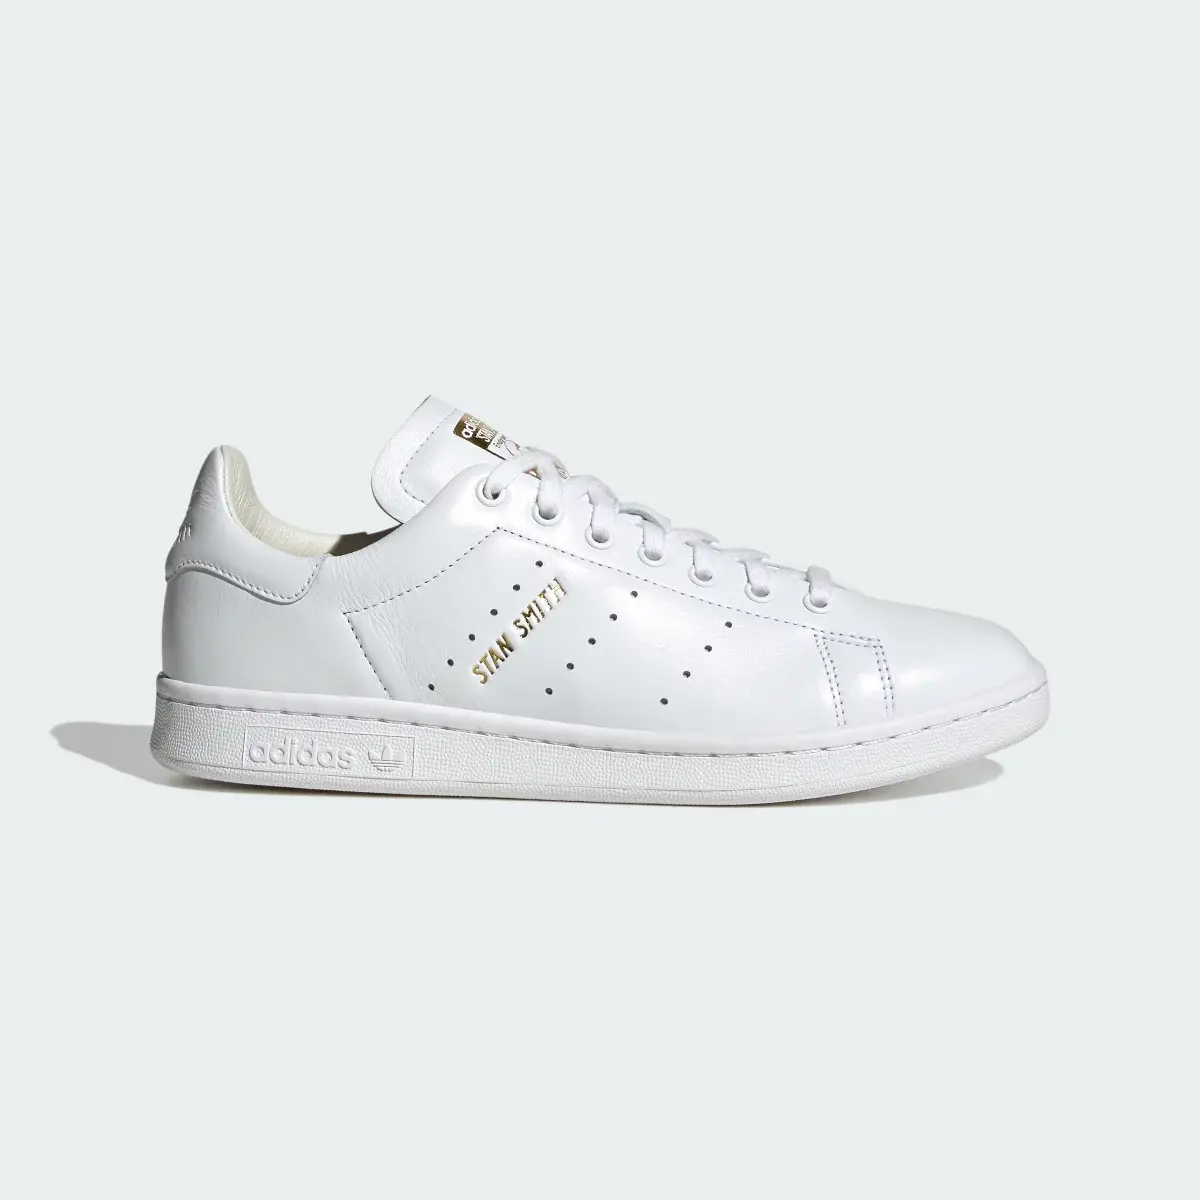 Adidas Stan Smith Lux Shoes. 2